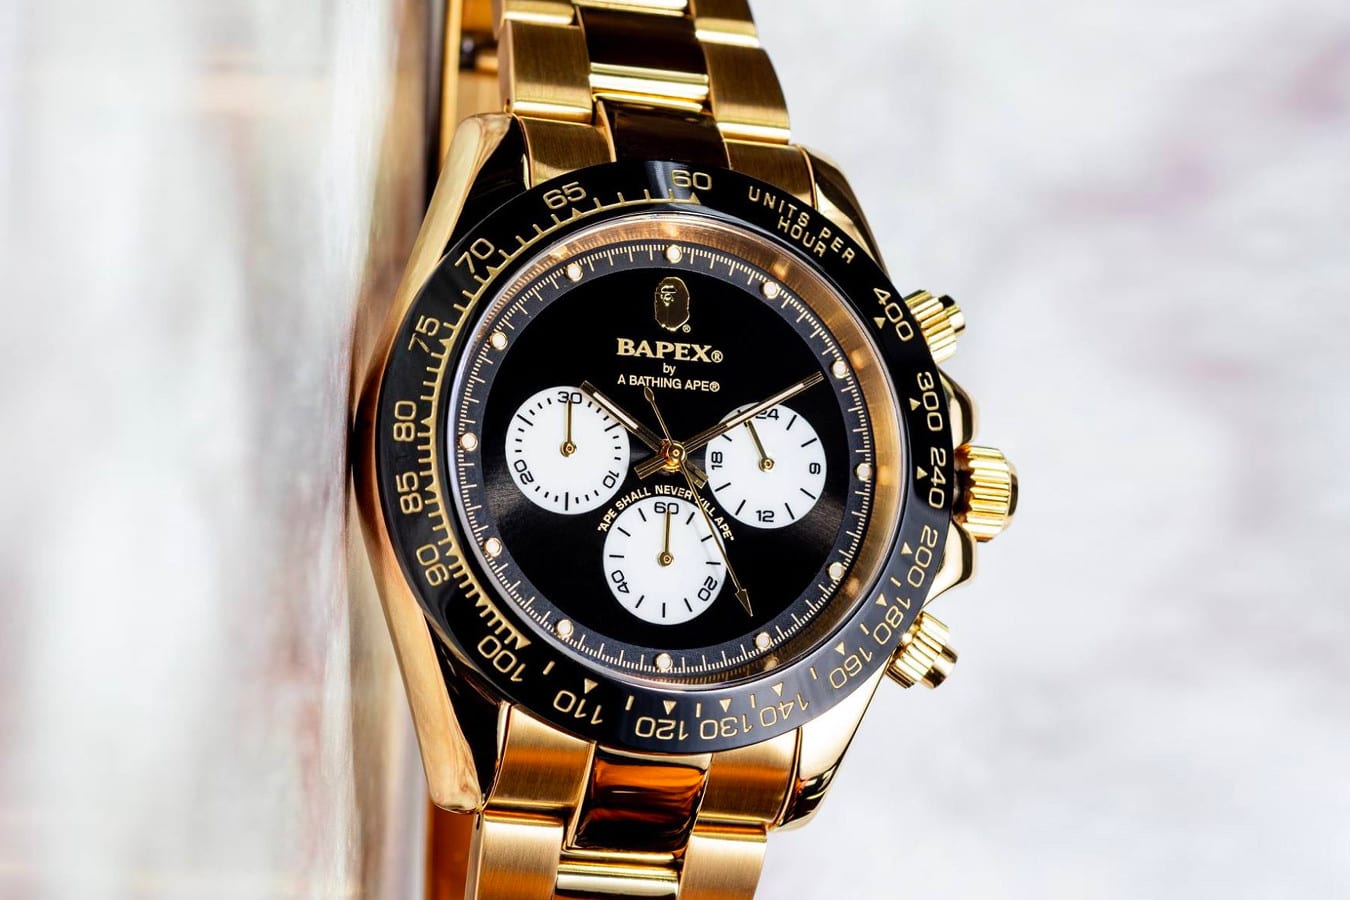 A Bathing Ape Goes for the Gold With a New TYPE 4 BAPEX® Watch - The Source